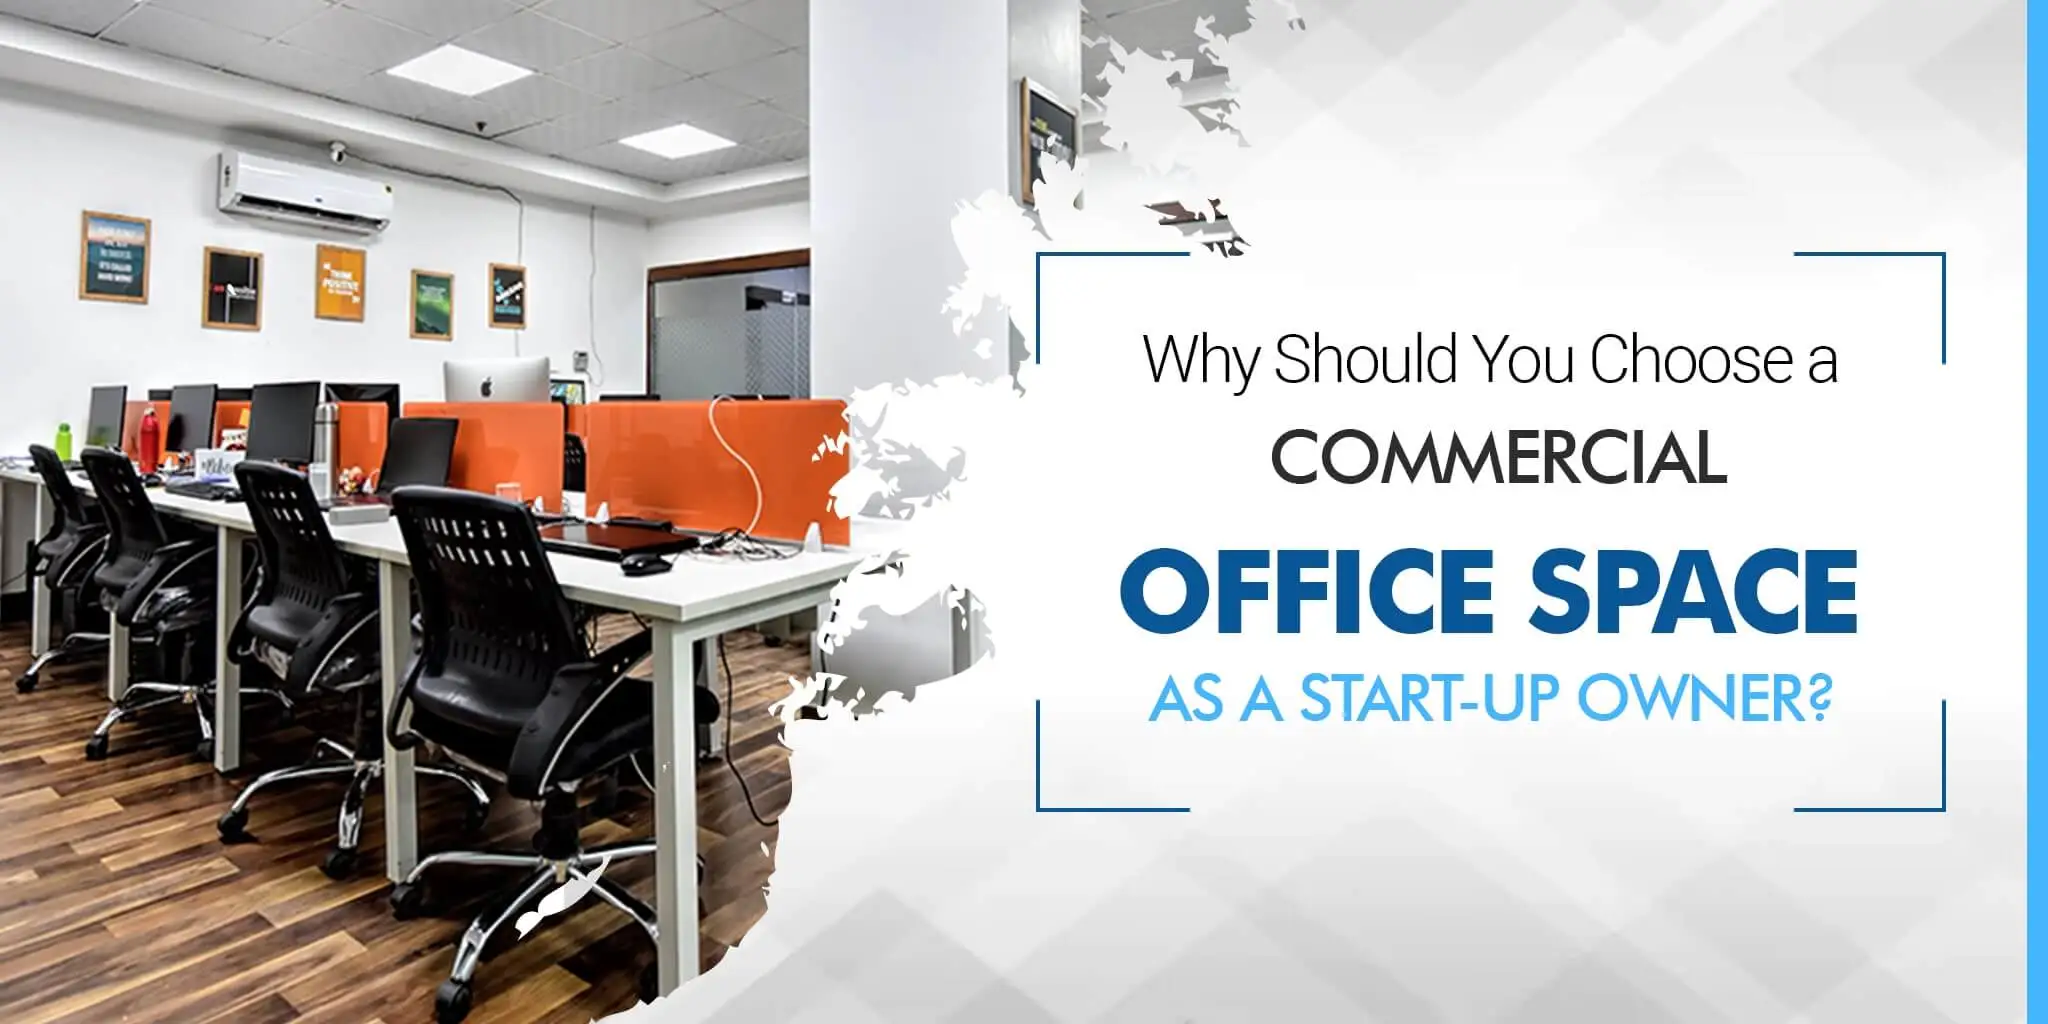 Why Should You Choose a Commercial Office Space As a Start up Owner?